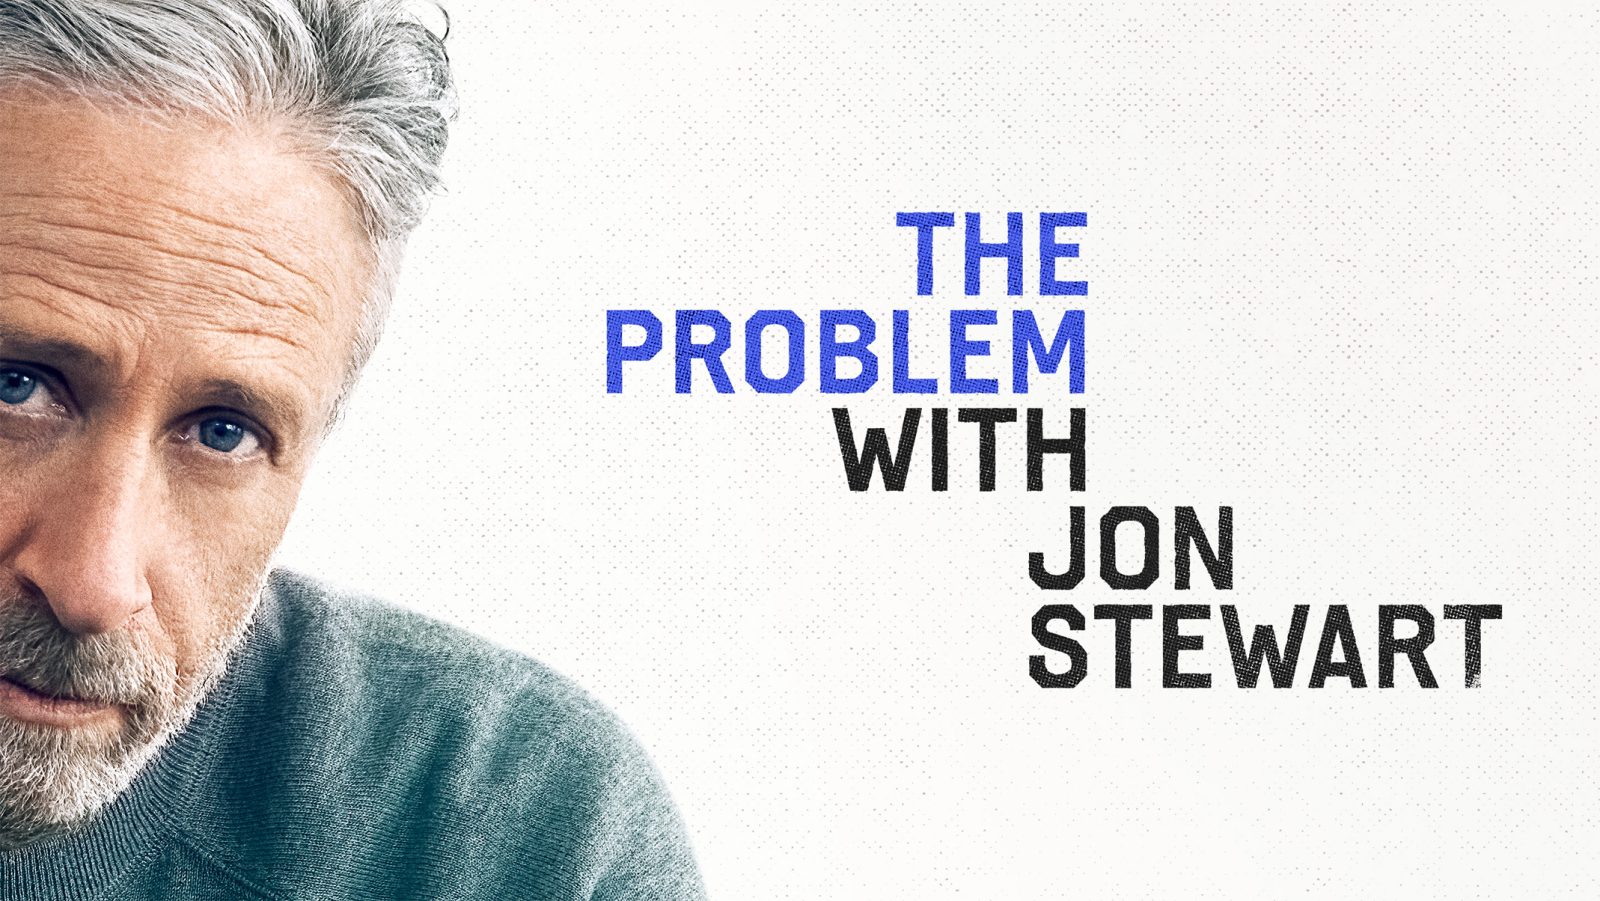 How to watch the new Jon Stewart show on Apple TV+